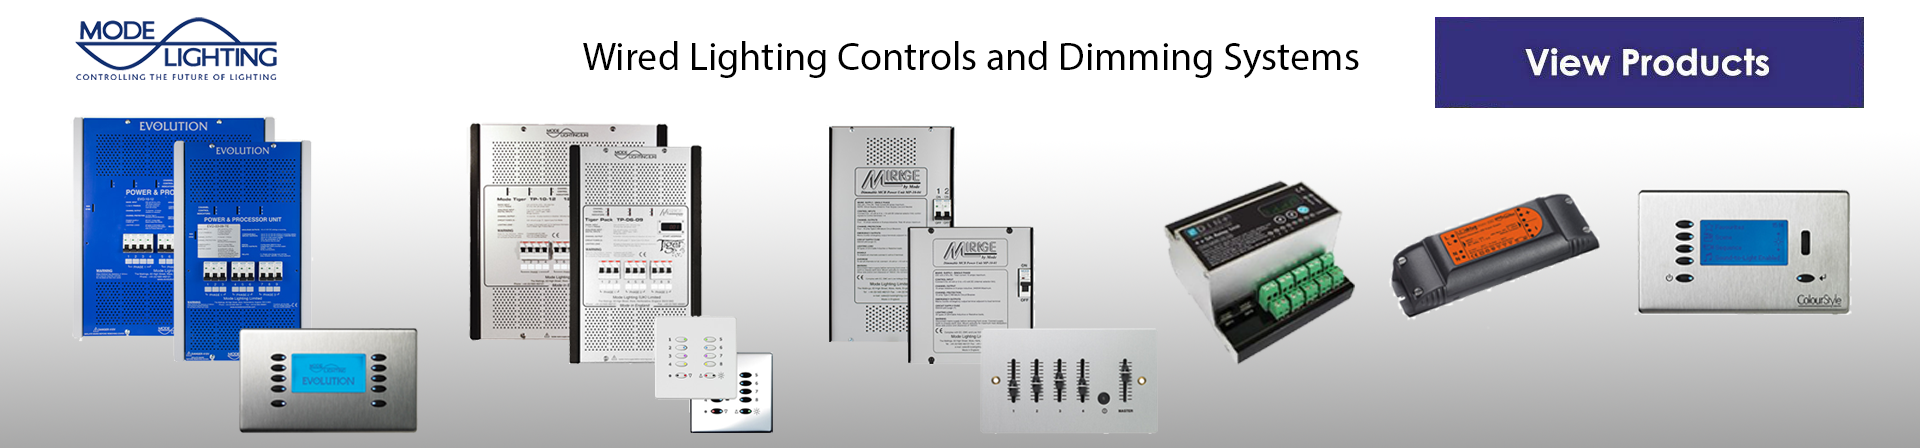 Mode Lighting Control systems and Dimmer Packs